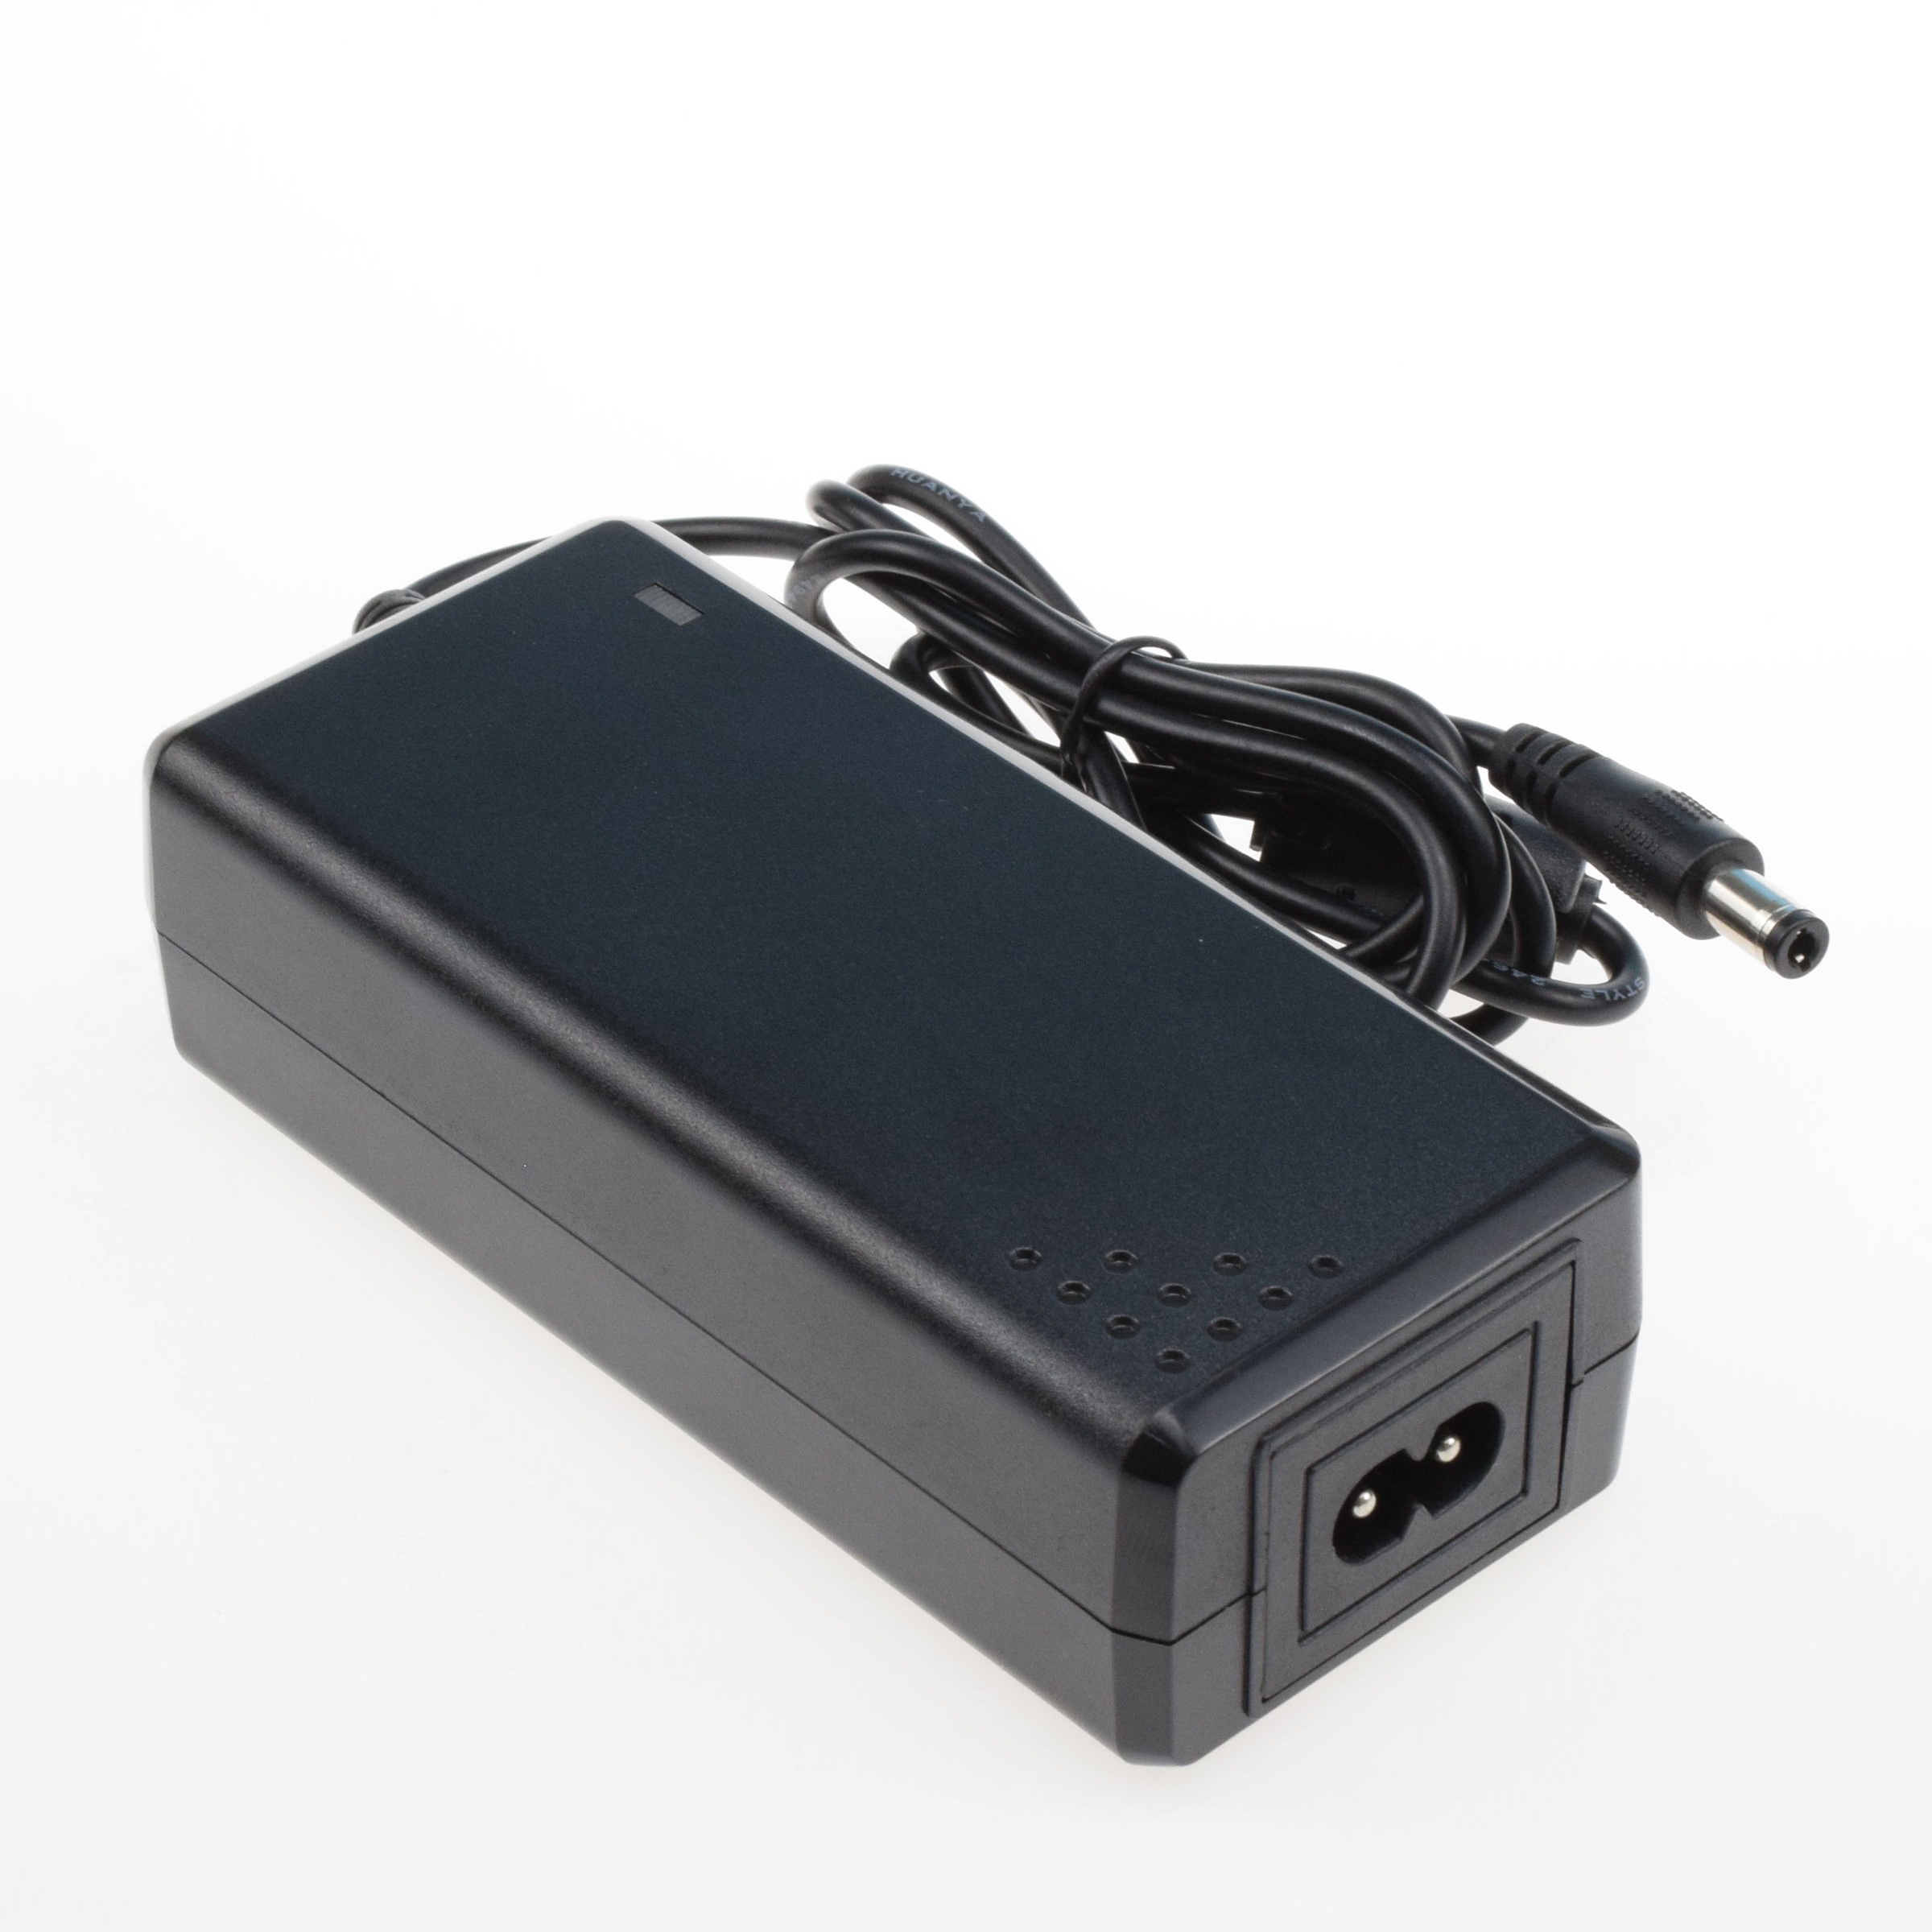 AC 100-240V 50-60Hz to DC 12V 1A 2A Power Supply Adapter Travel Wall  Portable Charger (5.5mm*2.5mm, 12V 1A 12W)